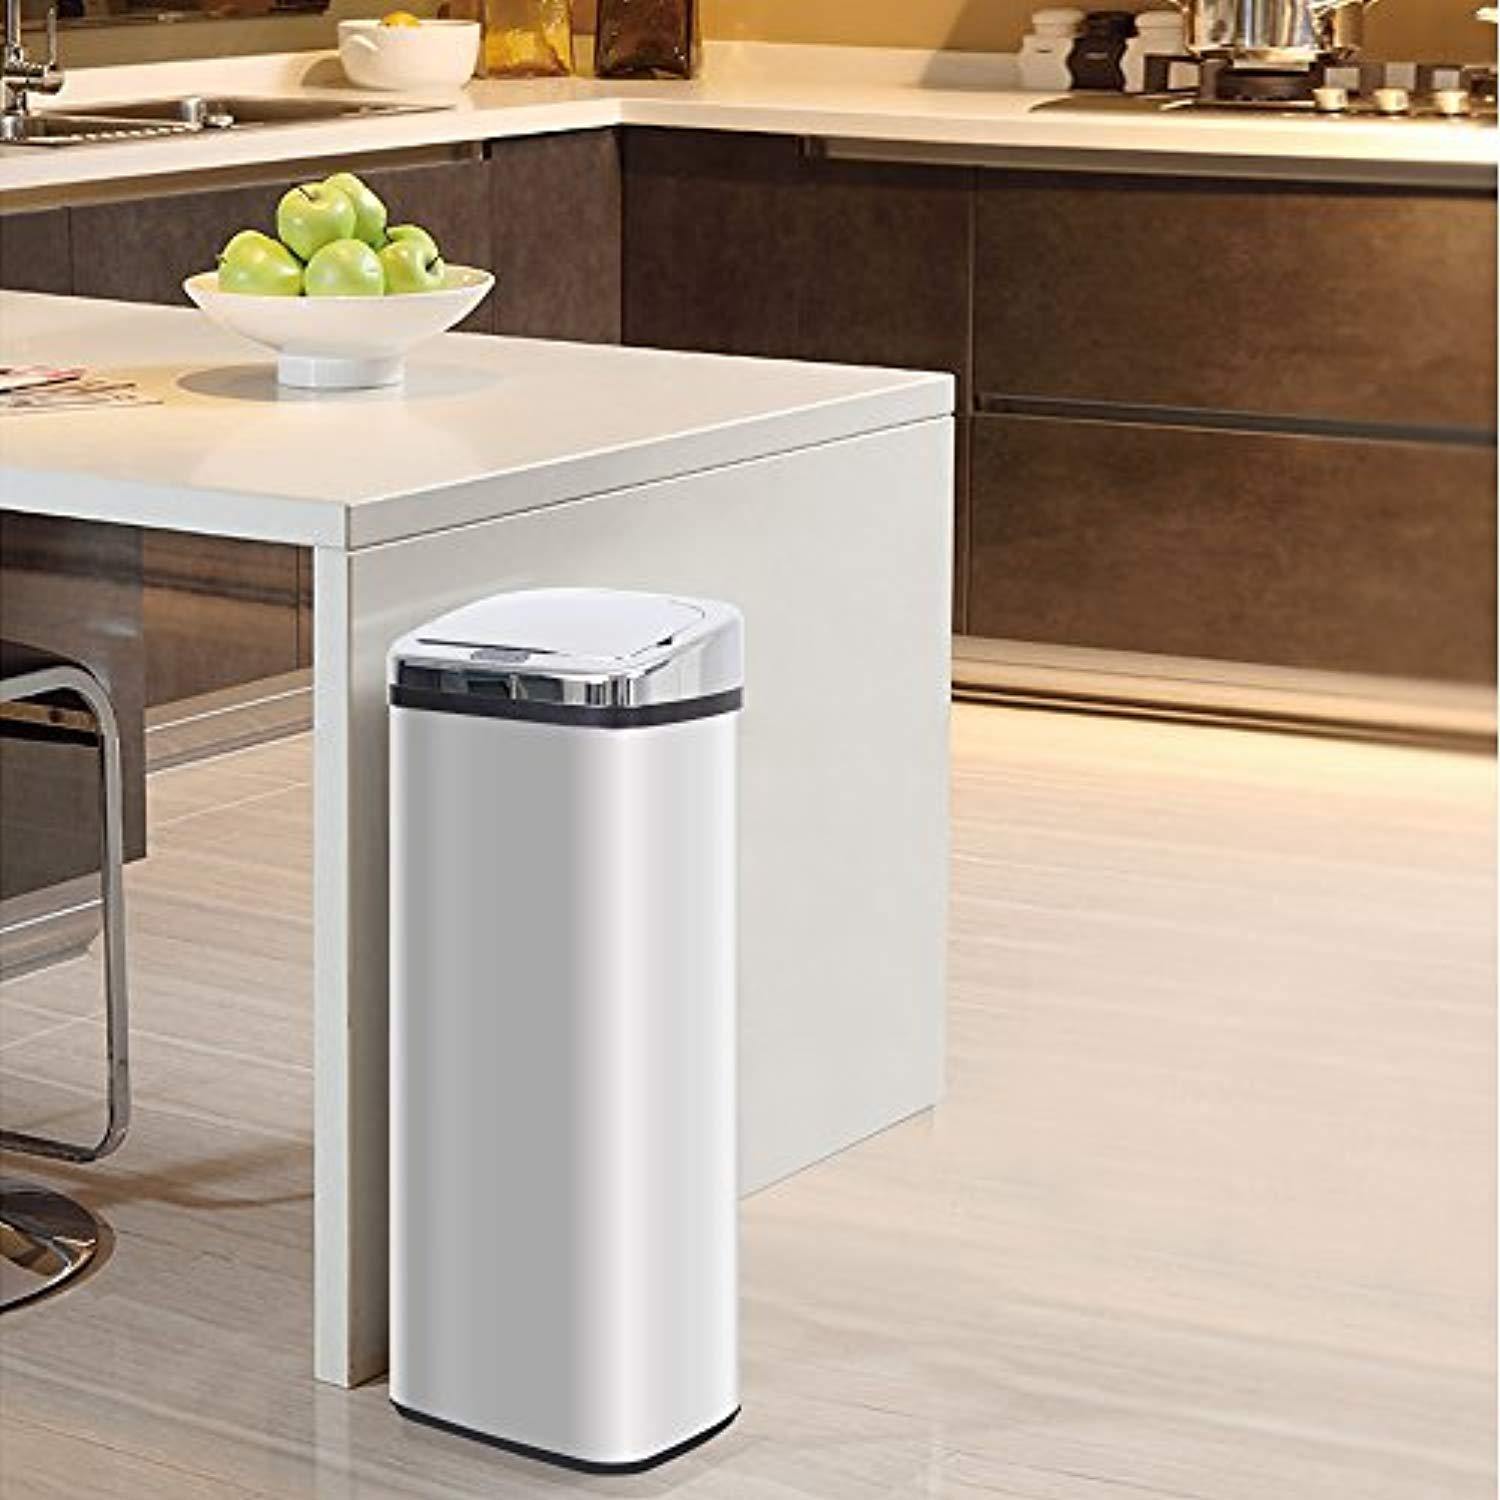 Bosonshop Automatic 13 Gallon Touchless Trash Can Garbage Bin, Stainless Steel